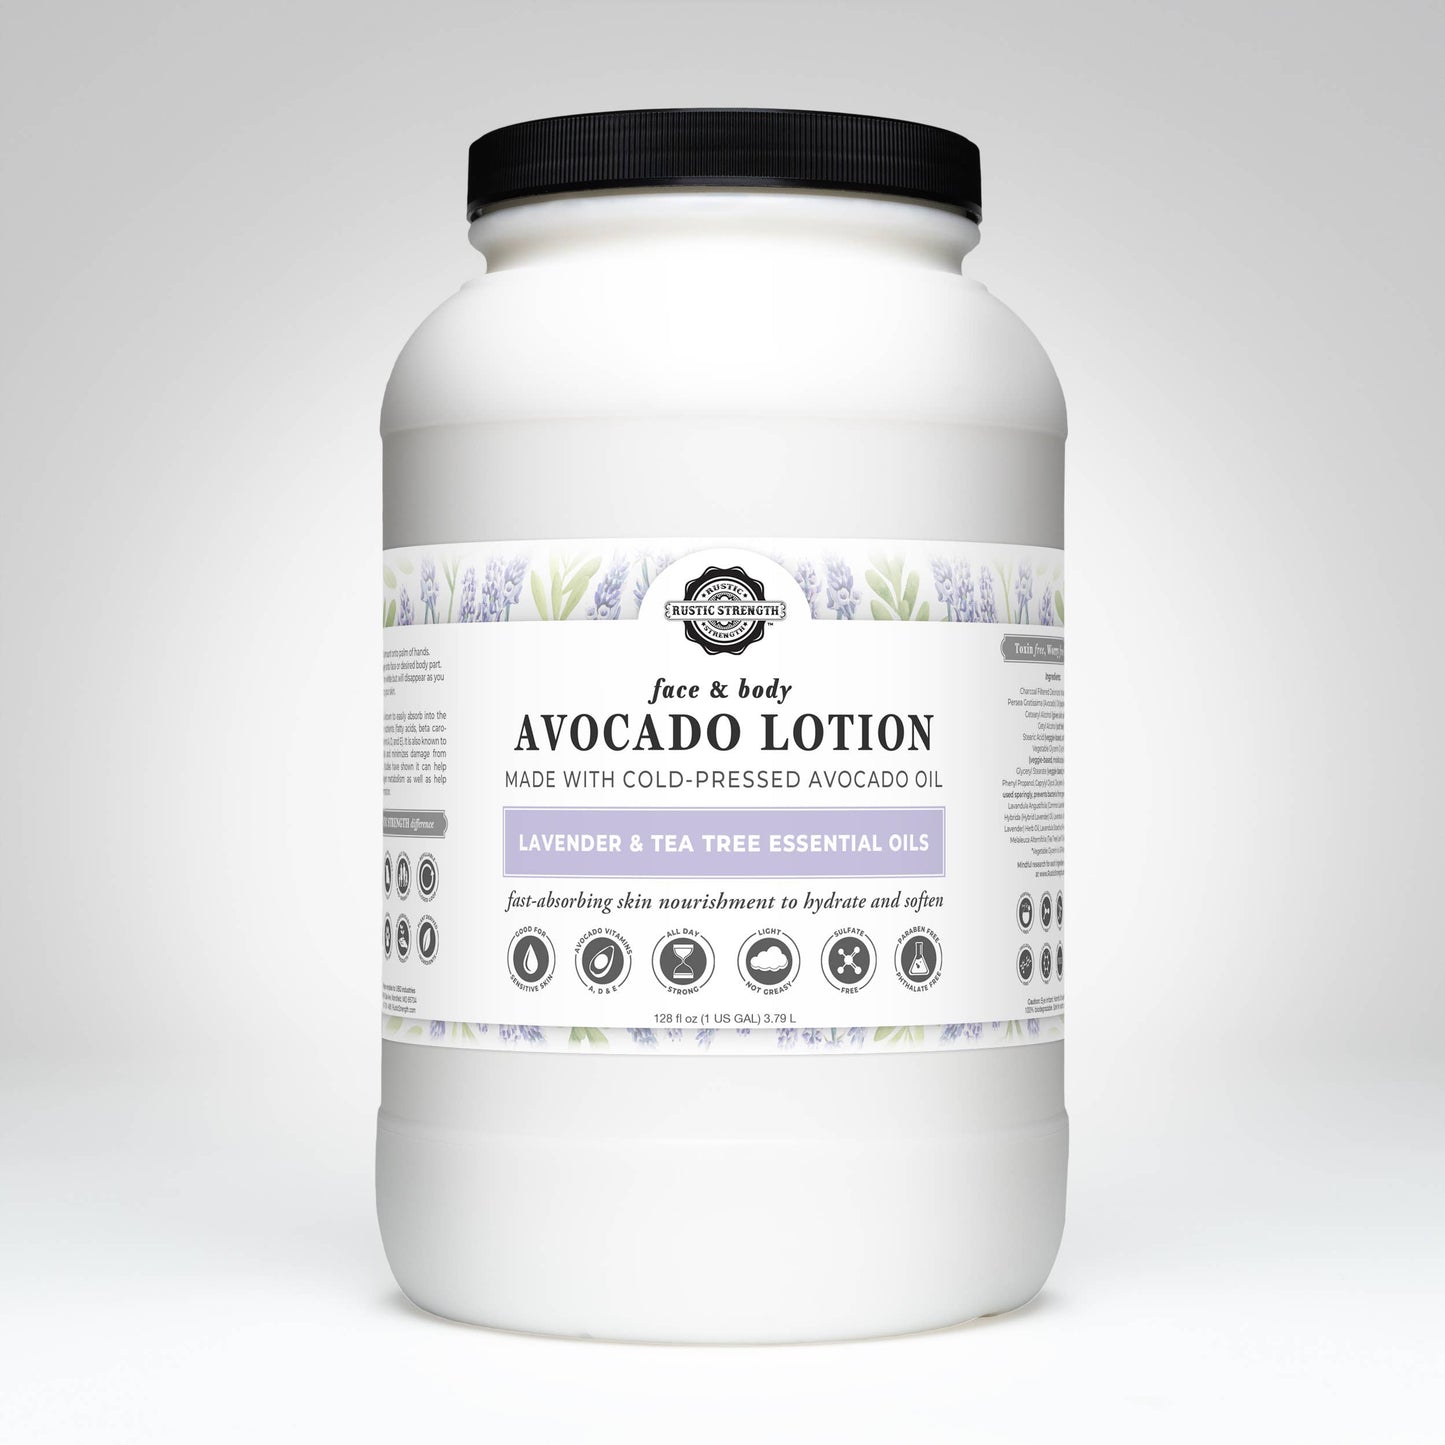 Rustic Strength Avocado Lotion for Face and Body